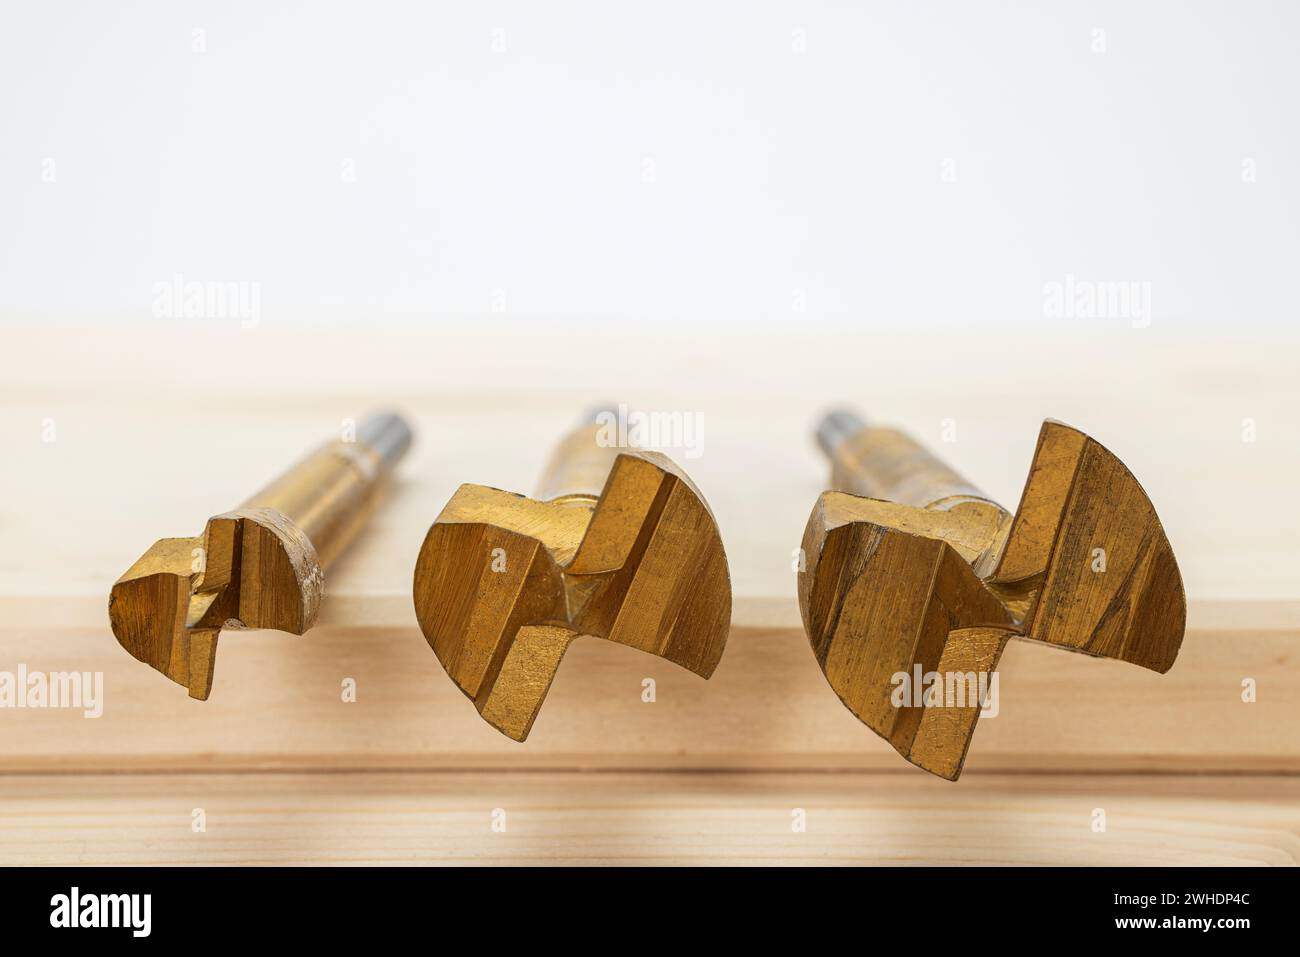 Woodworking, three Forstner bits 15, 25, and 30 mm, lying on glued wood panel, blurring, Stock Photo